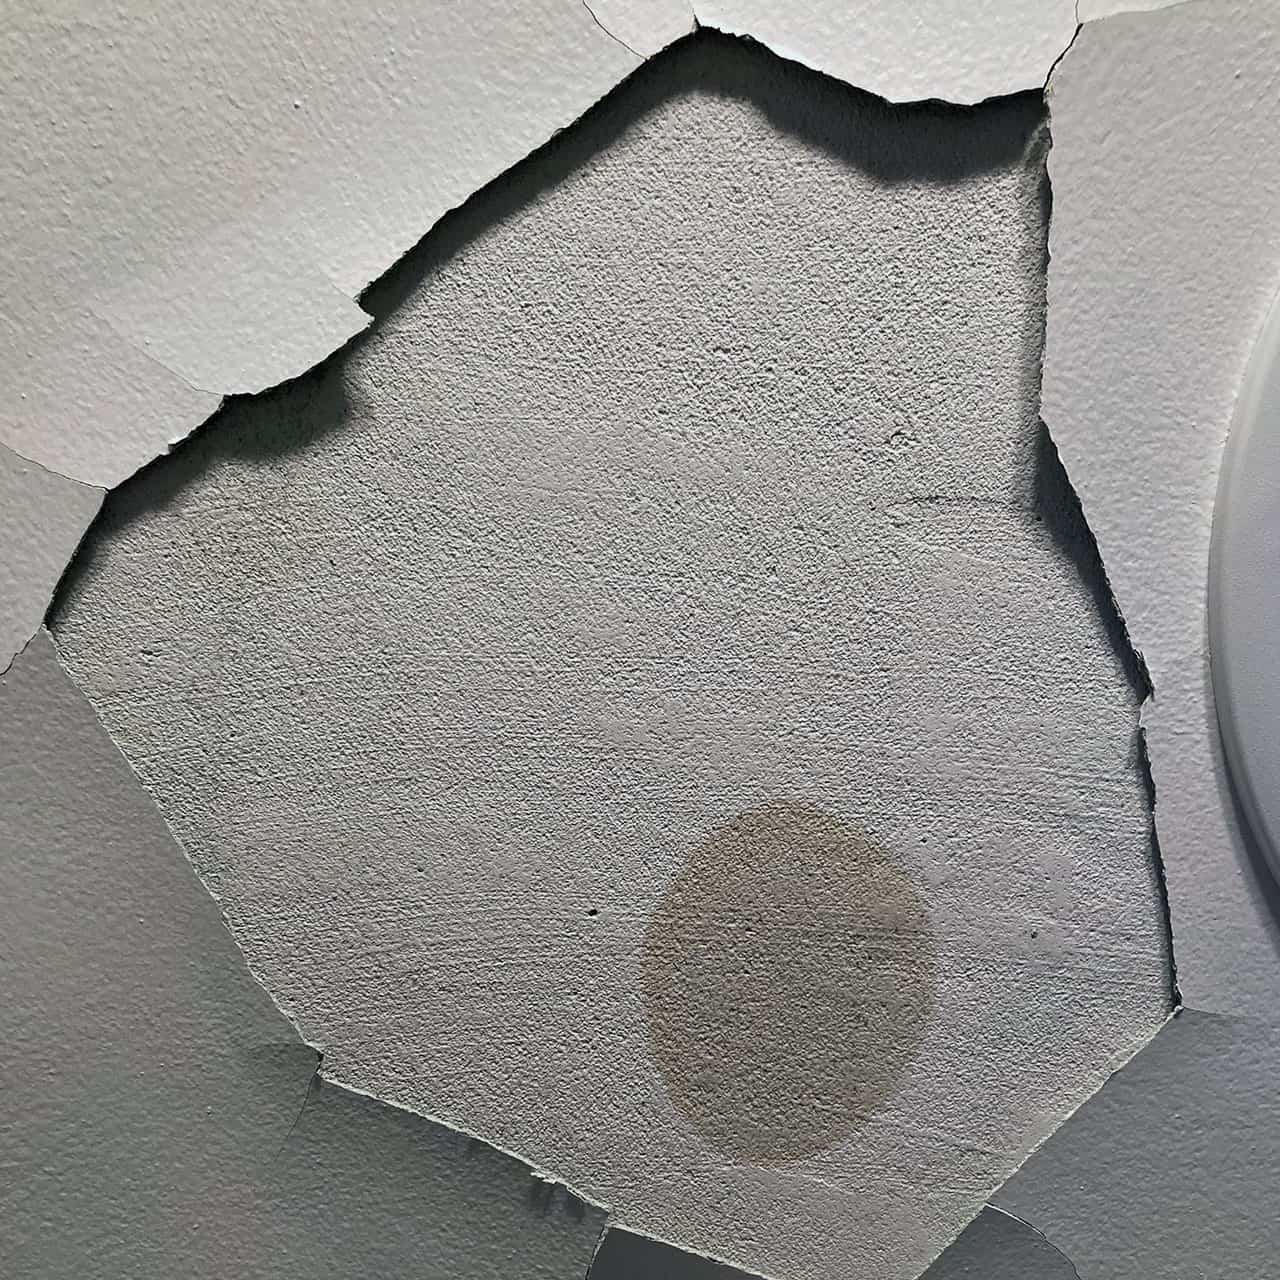 The leak in our bathroom ceiling